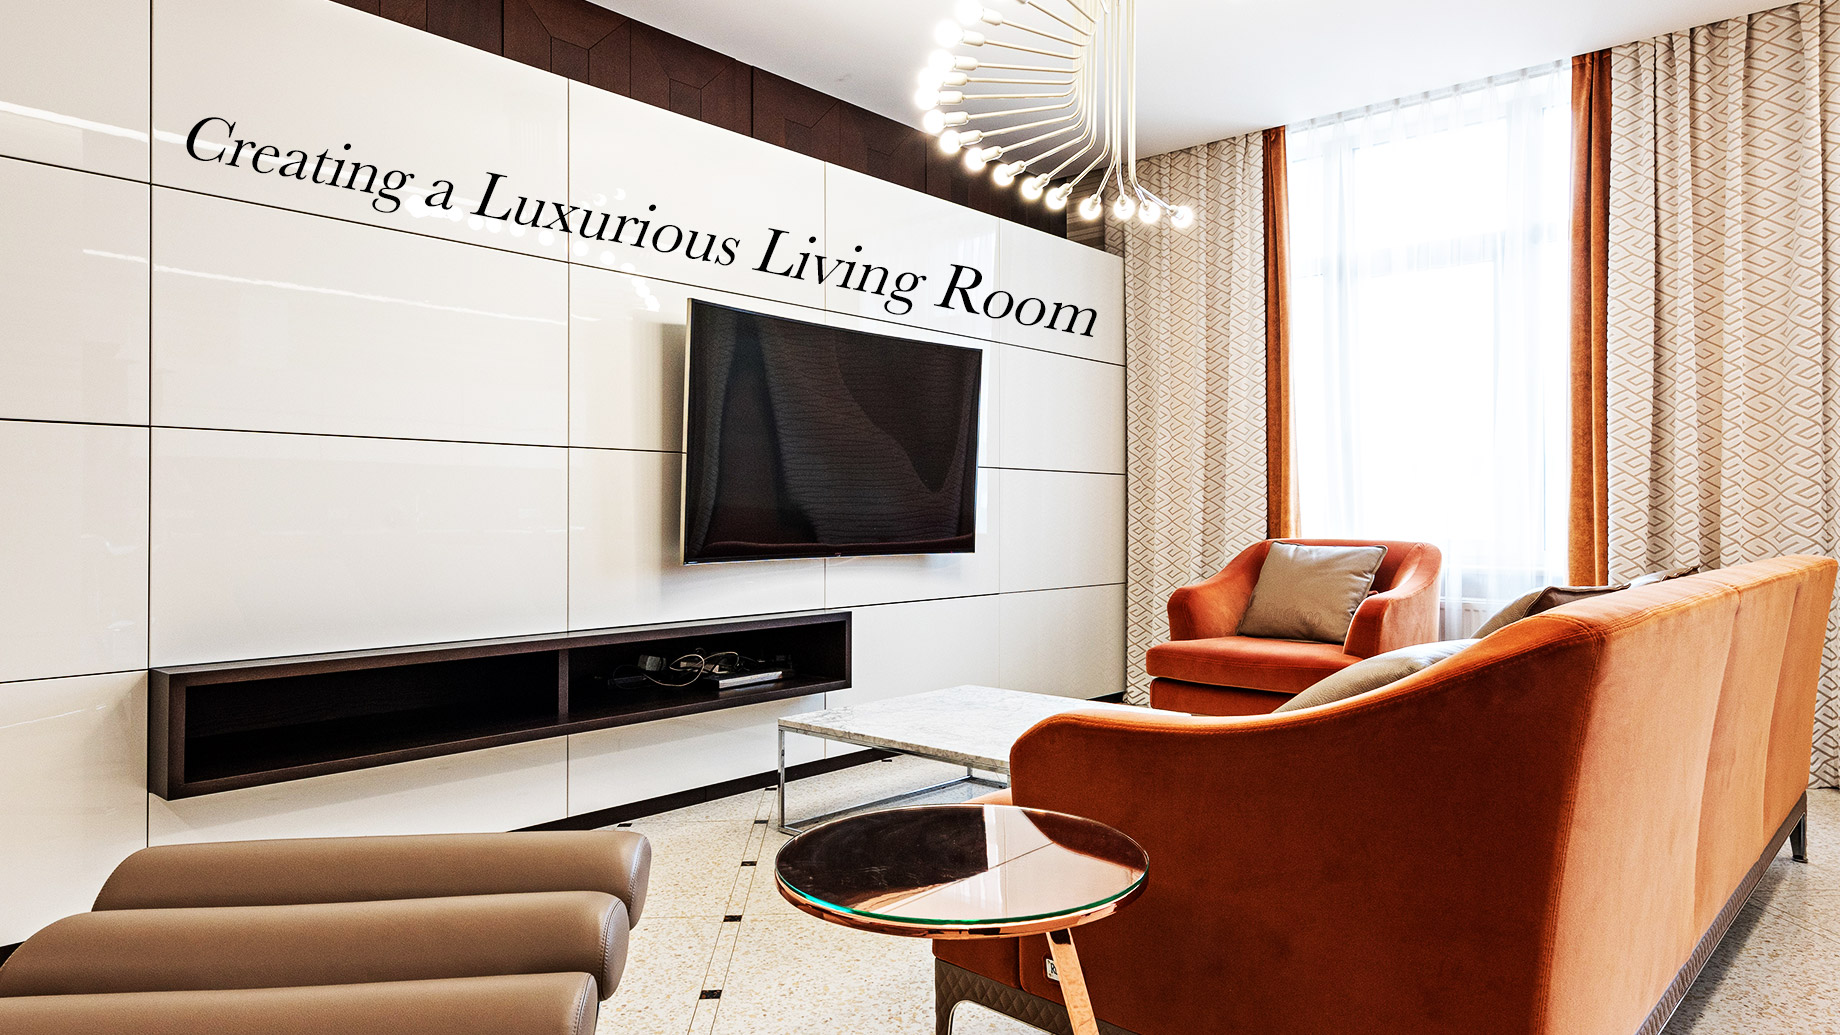 Creating a Luxurious Living Room